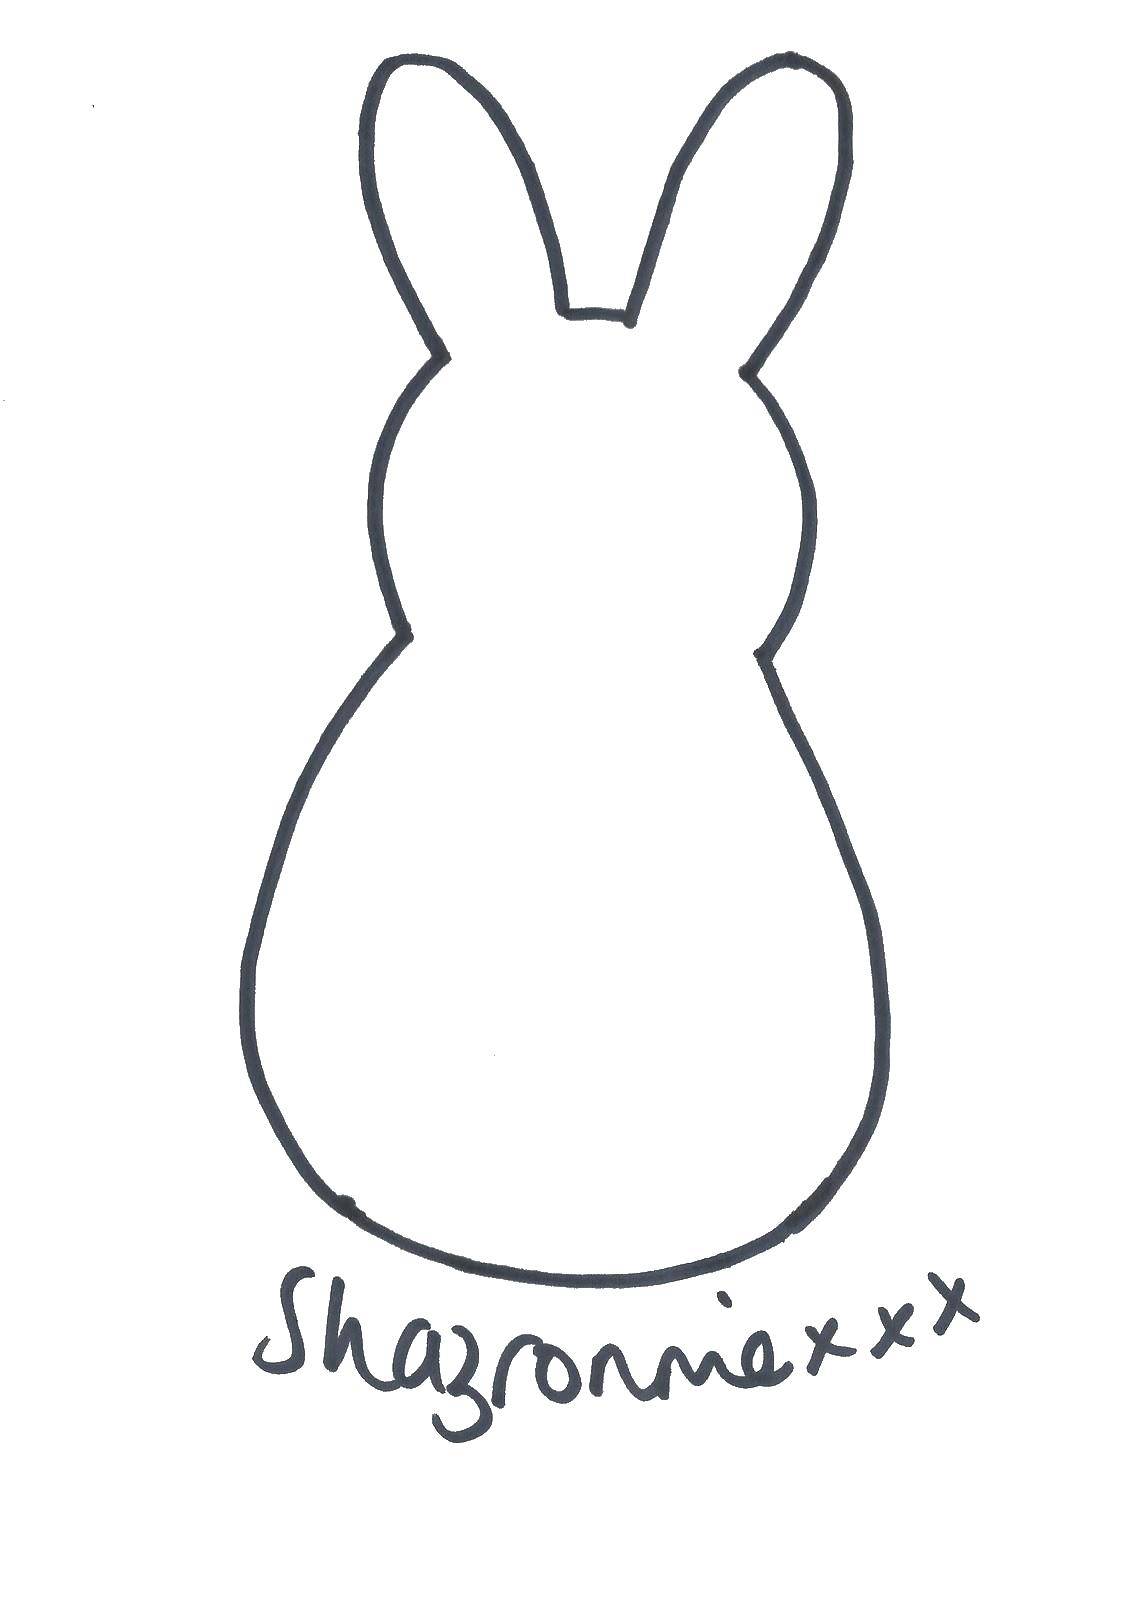 Coloring The outline of the rabbit. Category The contour of the hare to cut. Tags:  the contours, hare, rabbit.